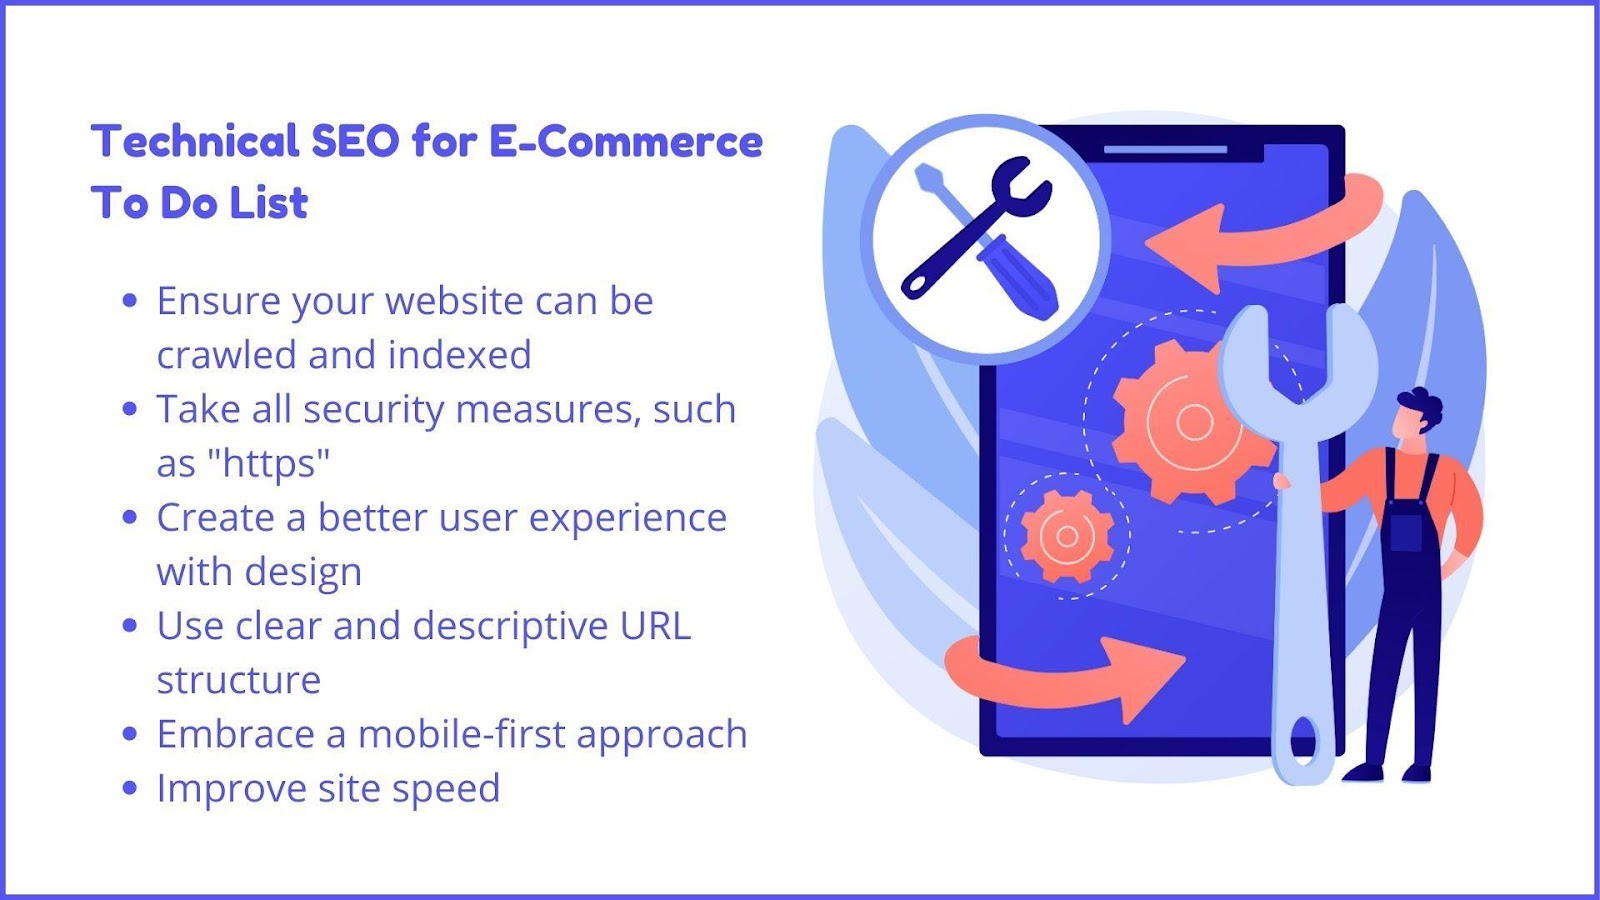 Illustration that shows a mobile phone with cogs and maintenance icons around, referring to technical SEO for e-commerce websites. It is accompanied by a Technical SEO for E-Commerce